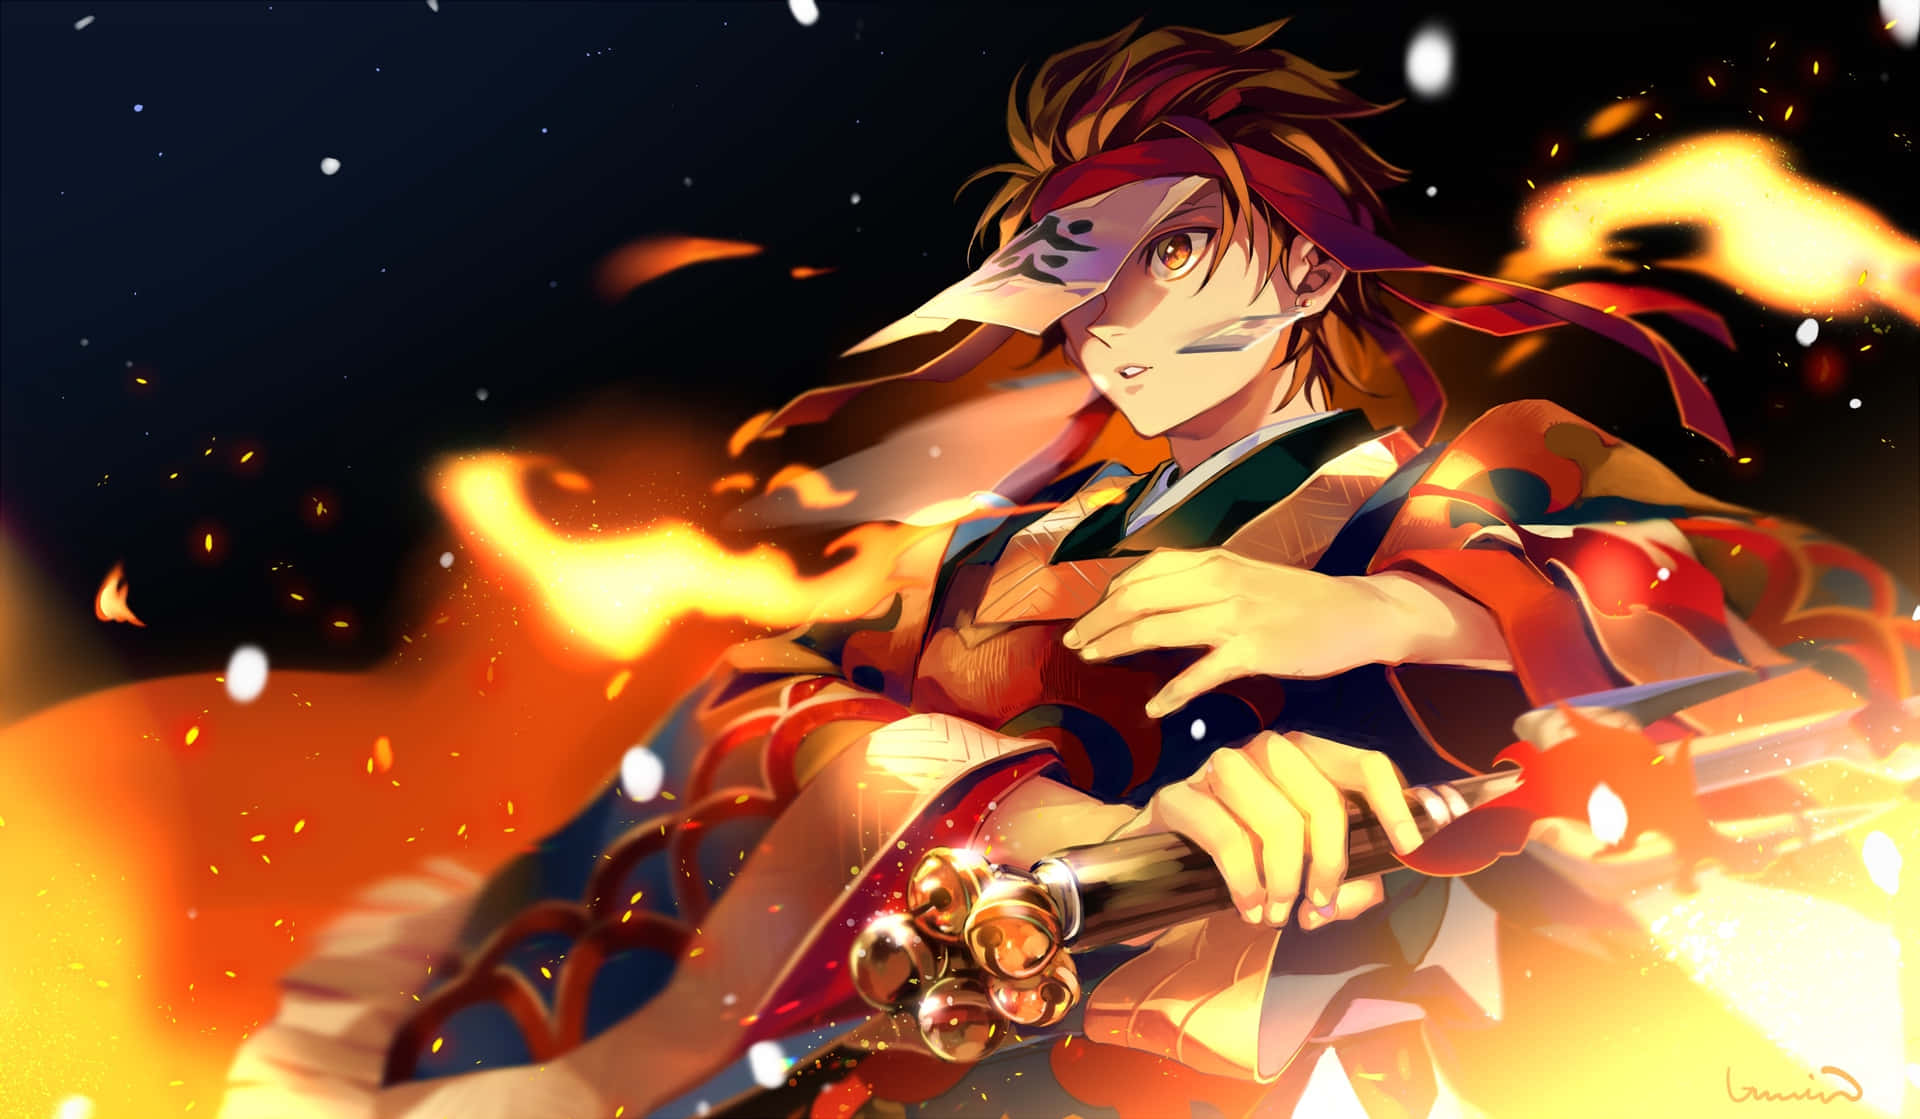 Anime Holding Sword With Fire Wallpaper